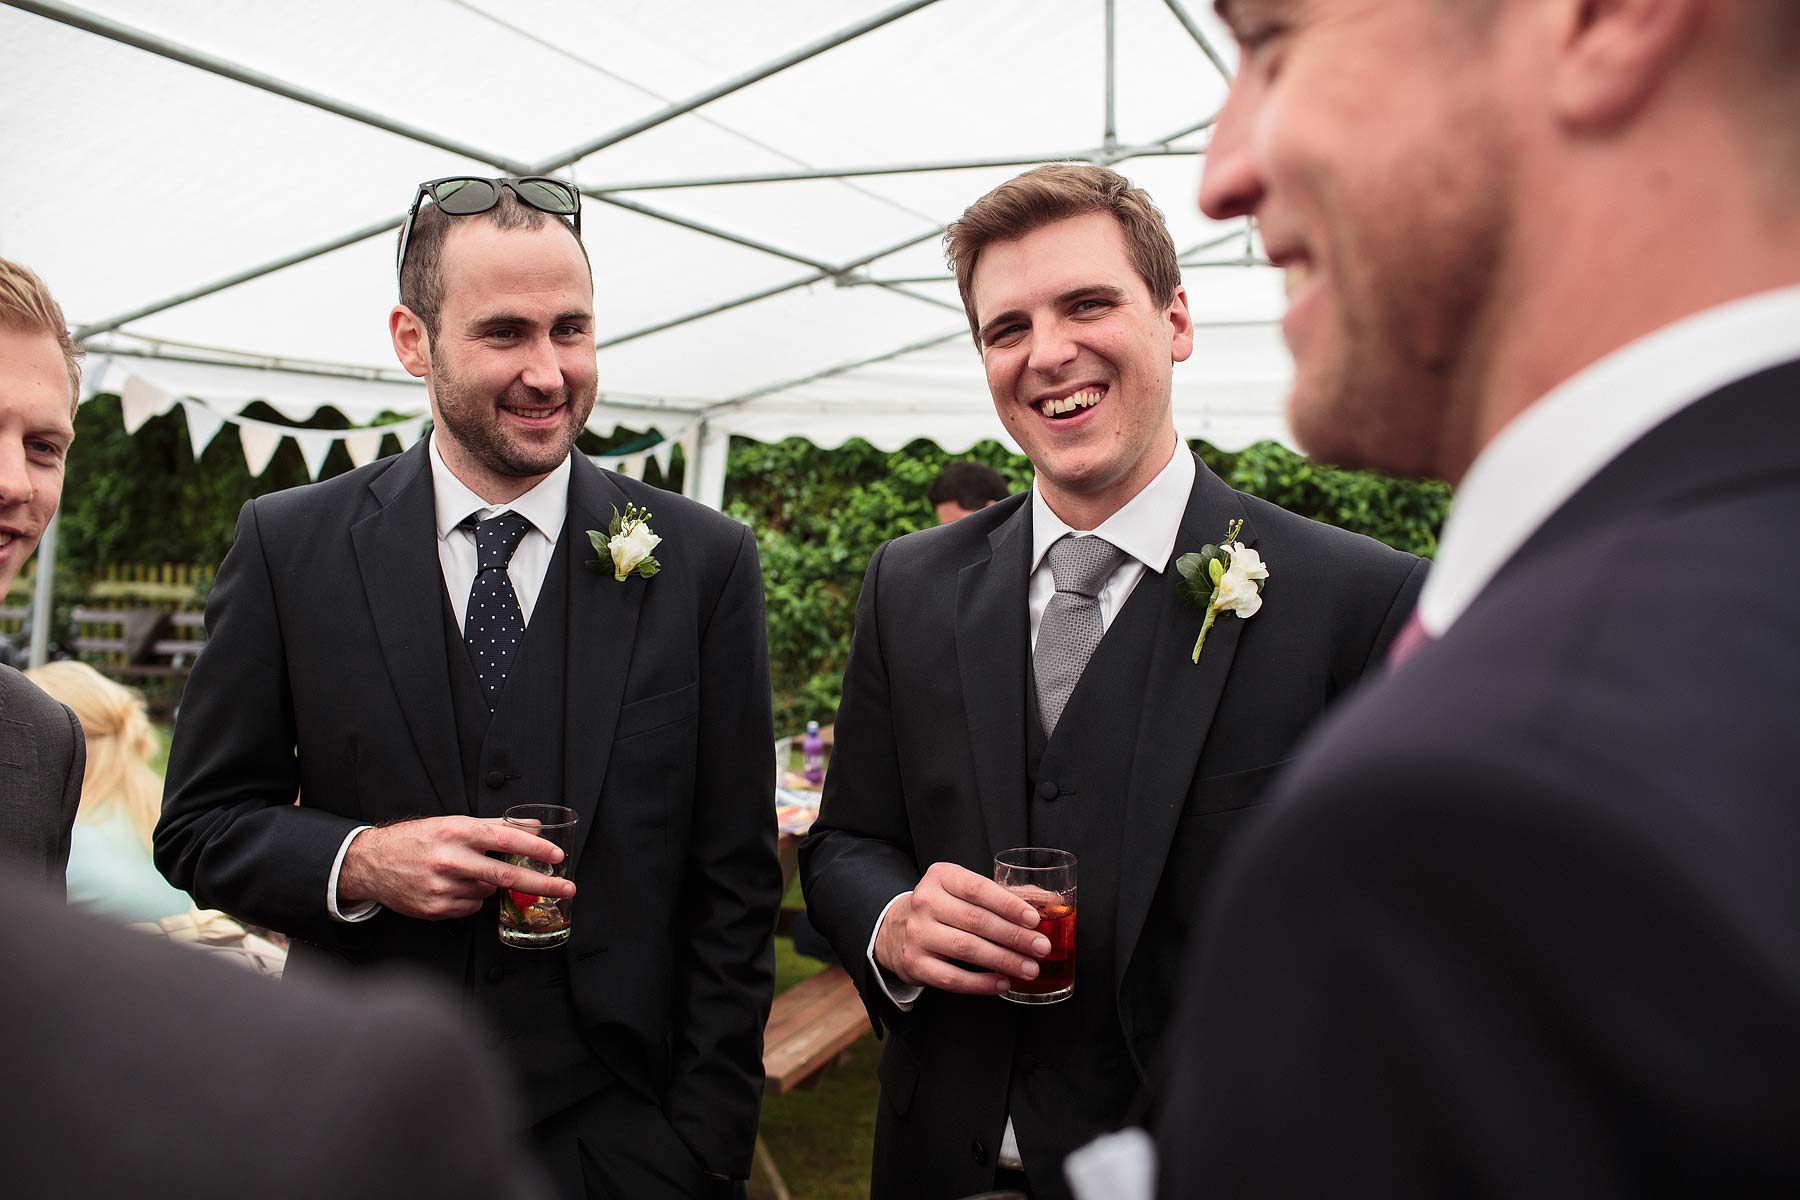 Candid photographs that capture the fun and frolics of the drinks reception and lawn games at Hundred House Hotel in Telford by Telford Documentary Wedding Photographer Stuart James